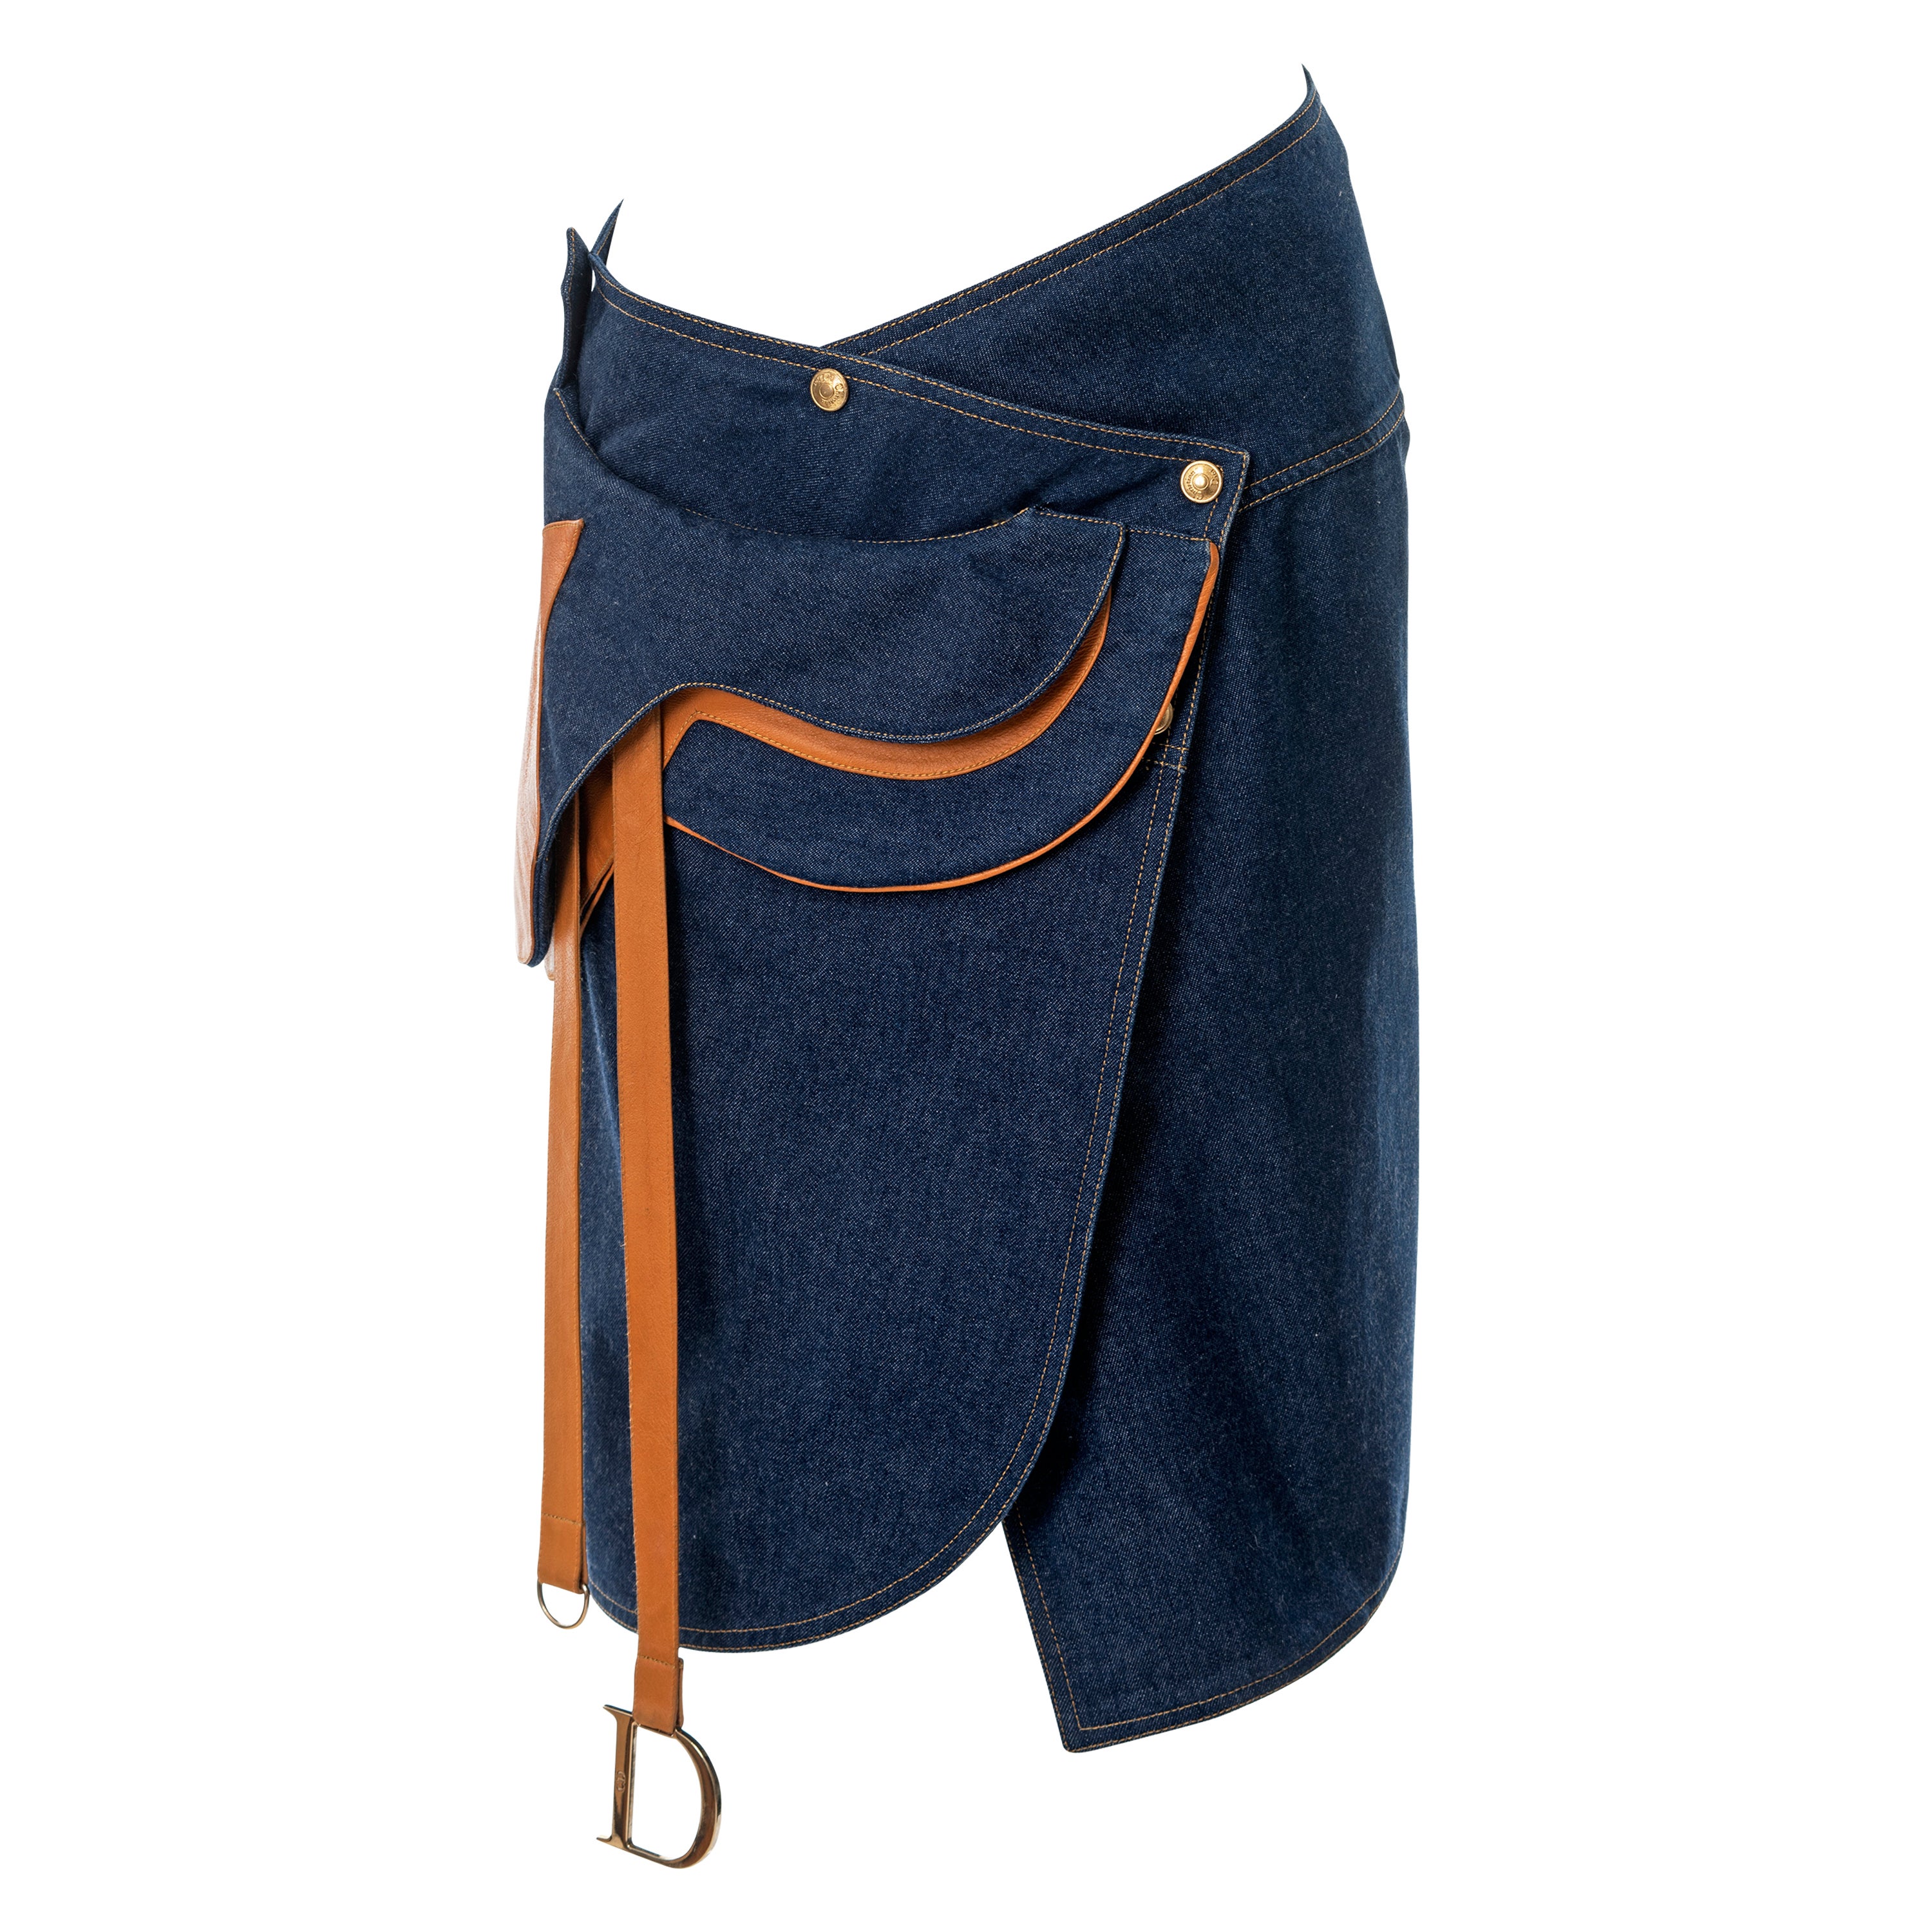 Christian Dior by John Galliano indigo denim and leather saddle skirt, ss 2000 For Sale